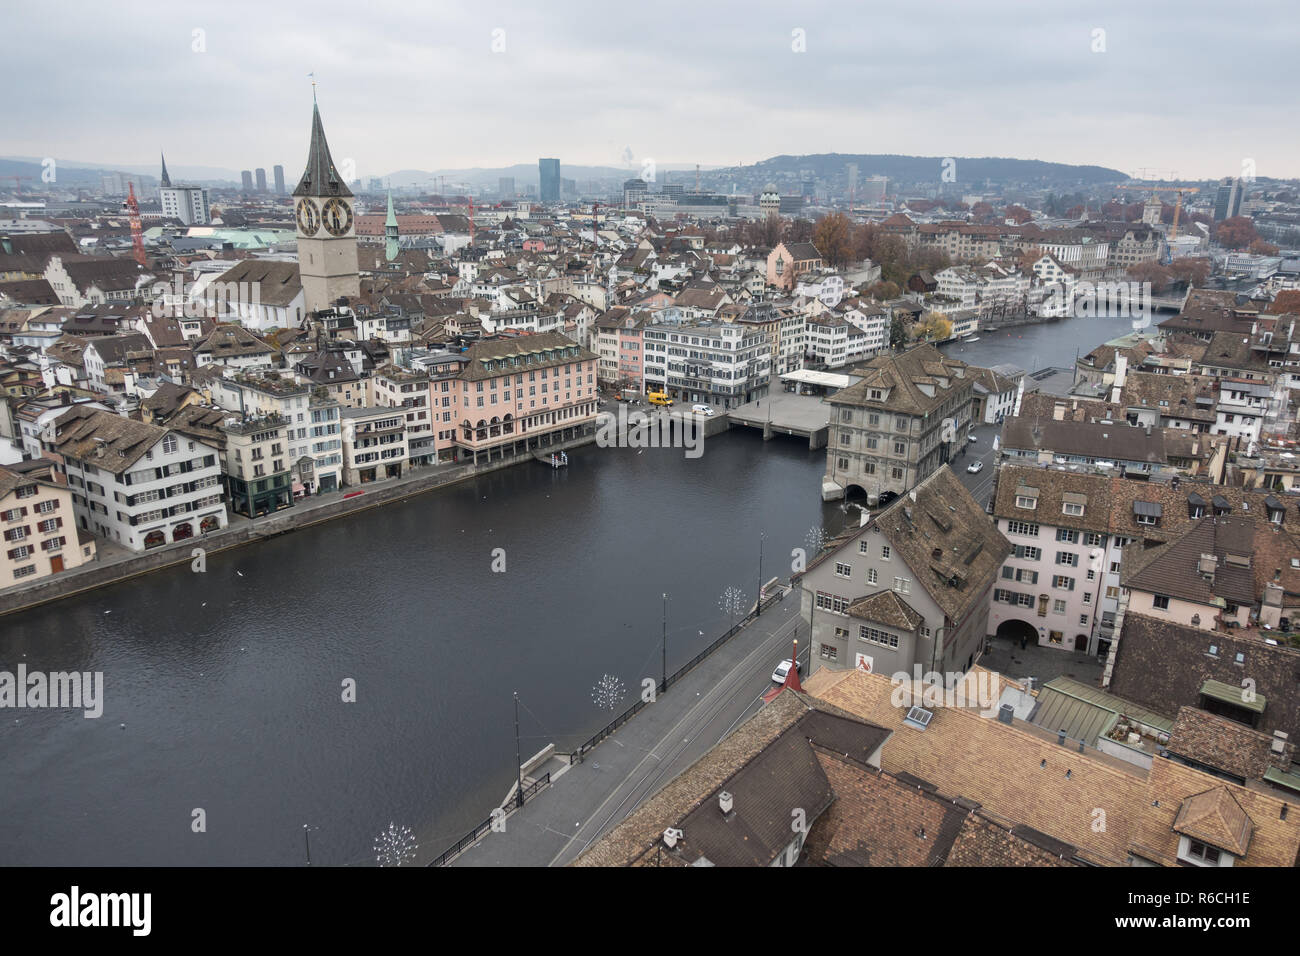 Zurich, Switzerland, Limmat River, looking north. St. Peter Church with  largest tower clock face in Europe easily visible, winding medieval streets  Stock Photo - Alamy